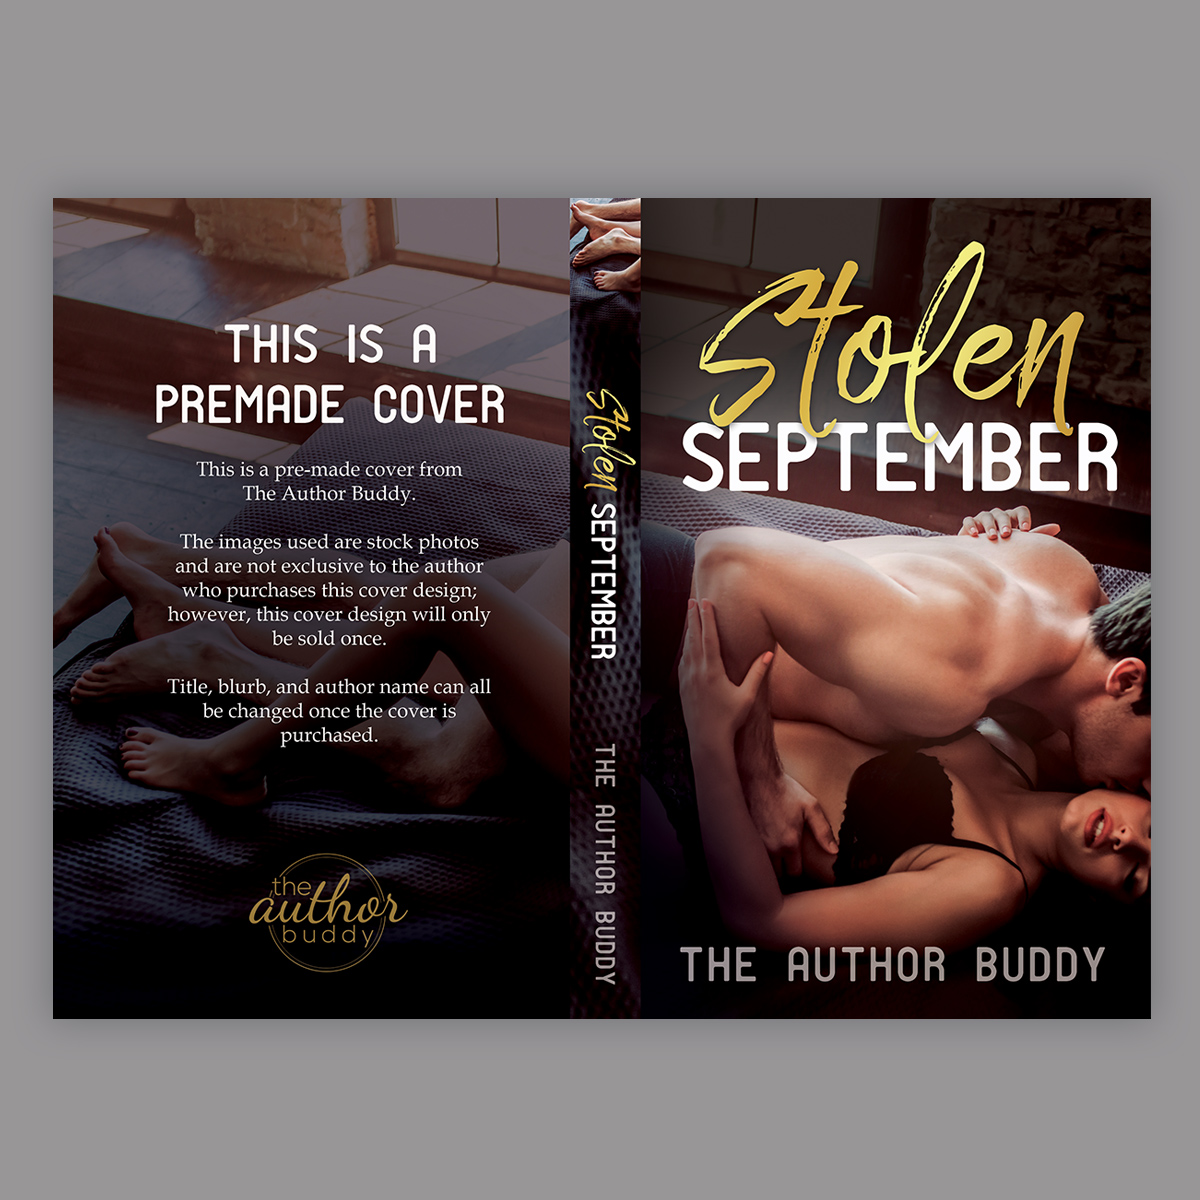 Stolen September - Premade Book Cover from The Author Buddy